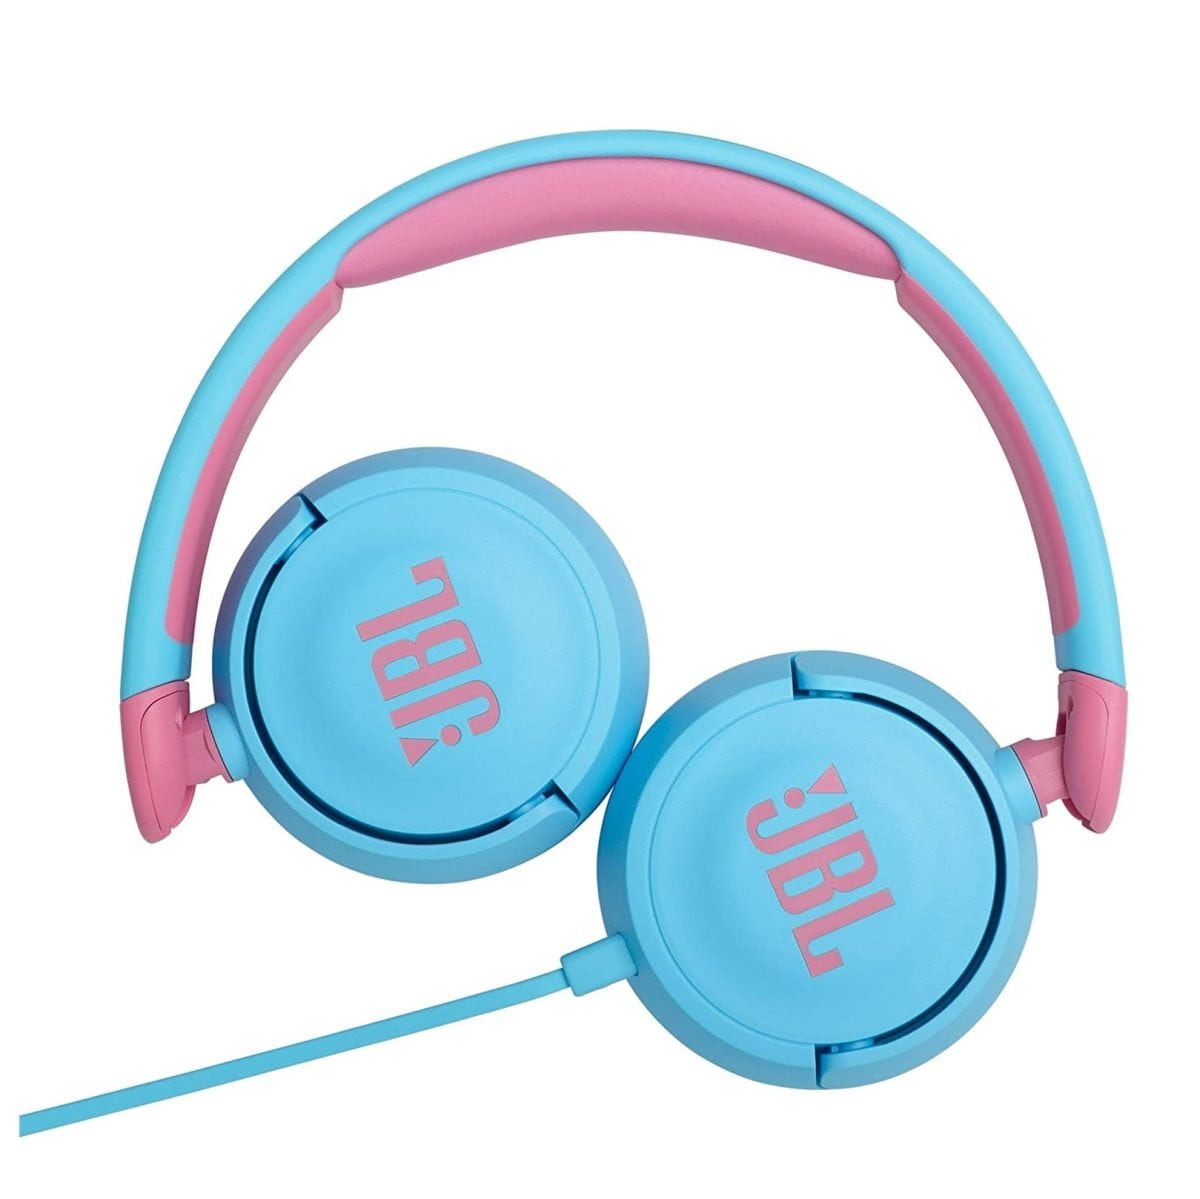 71Ei4Yjsal. Ac Sl1500 Jbl &Amp;Lt;H1&Amp;Gt;Jbl Jr310Red Kids Wired On-Ear Headphones-Blue&Amp;Lt;/H1&Amp;Gt; &Amp;Lt;Ul Class=&Amp;Quot;A-Unordered-List A-Vertical A-Spacing-Mini&Amp;Quot;&Amp;Gt; &Amp;Lt;Li&Amp;Gt;&Amp;Lt;Span Class=&Amp;Quot;A-List-Item&Amp;Quot;&Amp;Gt;Jbl Safe Sound (&Amp;Lt;85Db)&Amp;Lt;/Span&Amp;Gt;&Amp;Lt;/Li&Amp;Gt; &Amp;Lt;Li&Amp;Gt;&Amp;Lt;Span Class=&Amp;Quot;A-List-Item&Amp;Quot;&Amp;Gt;Designed For Kids&Amp;Lt;/Span&Amp;Gt;&Amp;Lt;/Li&Amp;Gt; &Amp;Lt;Li&Amp;Gt;&Amp;Lt;Span Class=&Amp;Quot;A-List-Item&Amp;Quot;&Amp;Gt;Built-In Mic&Amp;Lt;/Span&Amp;Gt;&Amp;Lt;/Li&Amp;Gt; &Amp;Lt;Li&Amp;Gt;&Amp;Lt;Span Class=&Amp;Quot;A-List-Item&Amp;Quot;&Amp;Gt;Ultra-Portable&Amp;Lt;/Span&Amp;Gt;&Amp;Lt;/Li&Amp;Gt; &Amp;Lt;Li&Amp;Gt;&Amp;Lt;Span Class=&Amp;Quot;A-List-Item&Amp;Quot;&Amp;Gt;Comfort Fit&Amp;Lt;/Span&Amp;Gt;&Amp;Lt;/Li&Amp;Gt; &Amp;Lt;Li&Amp;Gt;&Amp;Lt;Span Class=&Amp;Quot;A-List-Item&Amp;Quot;&Amp;Gt;Connectivity Technology: Wired&Amp;Lt;/Span&Amp;Gt;&Amp;Lt;/Li&Amp;Gt; &Amp;Lt;Li&Amp;Gt;&Amp;Lt;Span Class=&Amp;Quot;A-List-Item&Amp;Quot;&Amp;Gt;Included Components: 1 X Jr310 Headphones&Amp;Lt;/Span&Amp;Gt;&Amp;Lt;/Li&Amp;Gt; &Amp;Lt;/Ul&Amp;Gt; Jbl Kids Headphone Jbl Kids Wired On-Ear Headphones-Blue